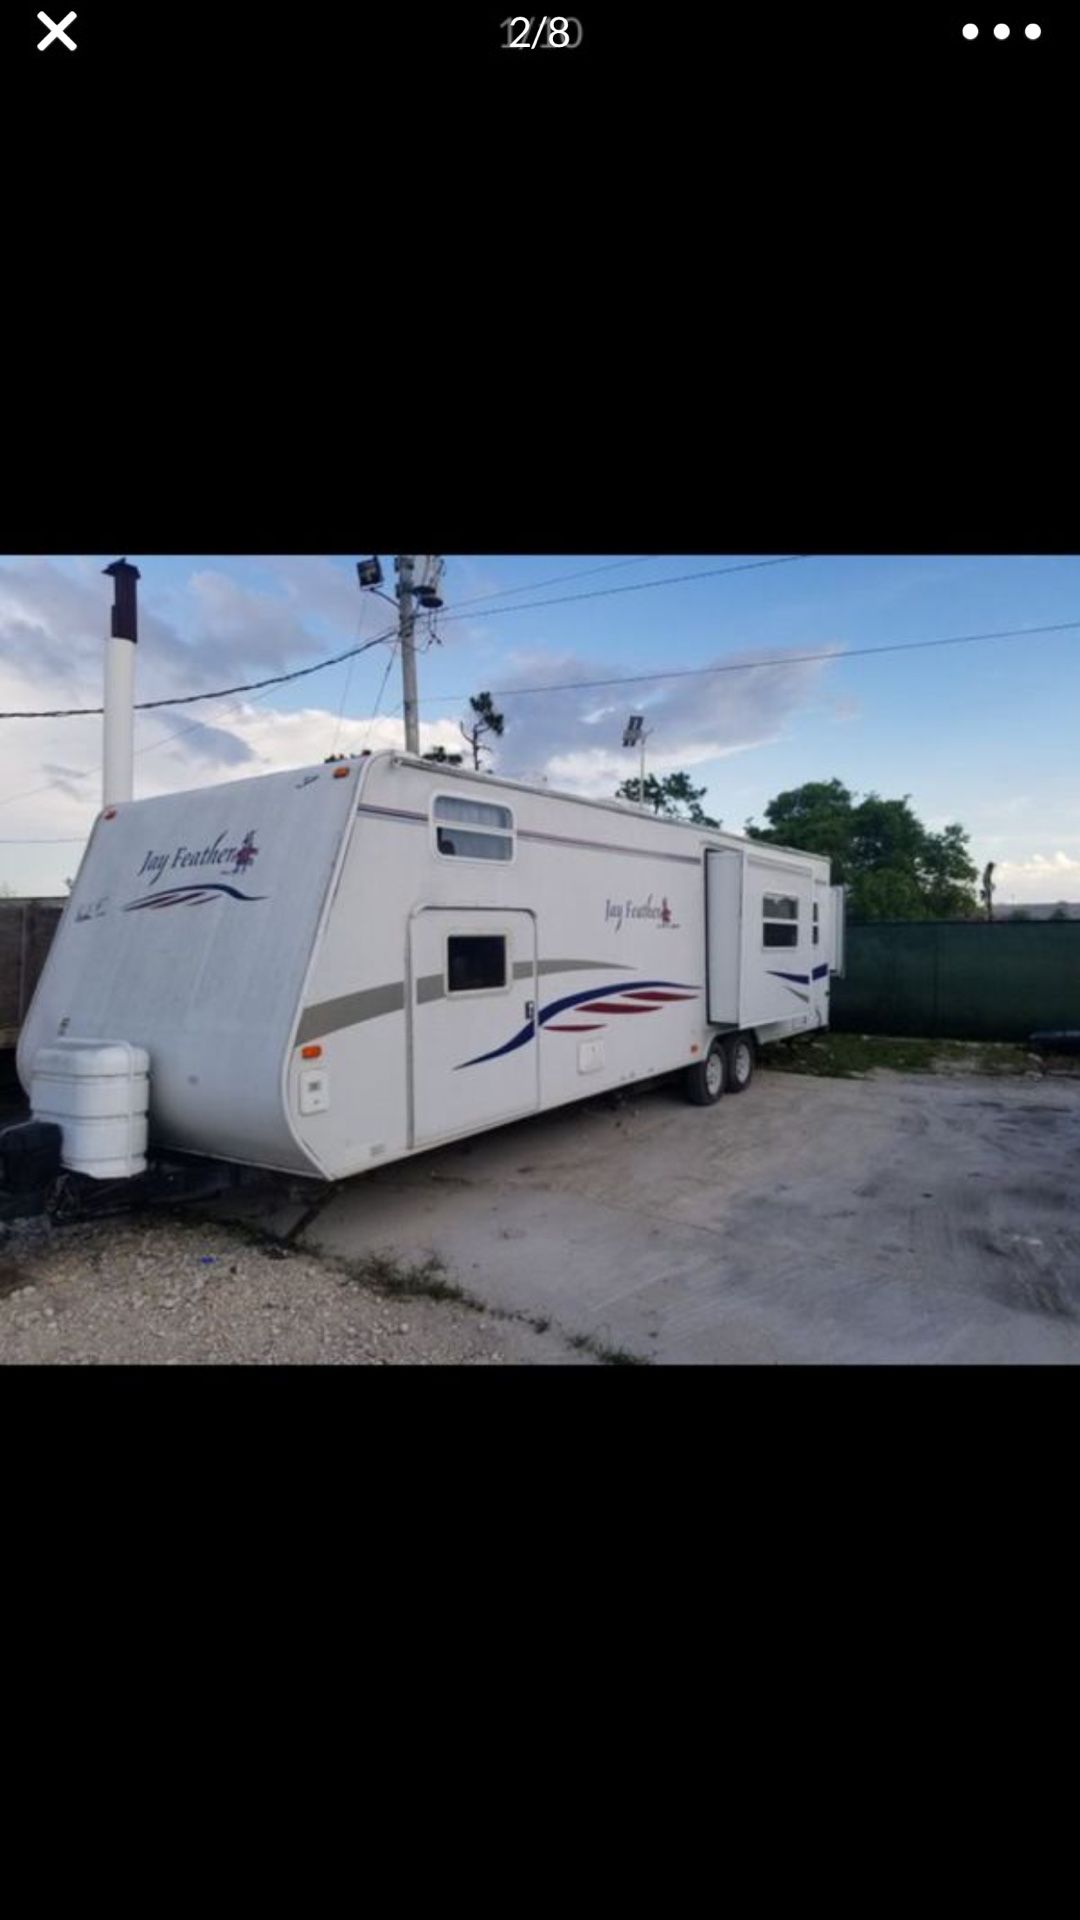 Jay feather 2 room travel trailer